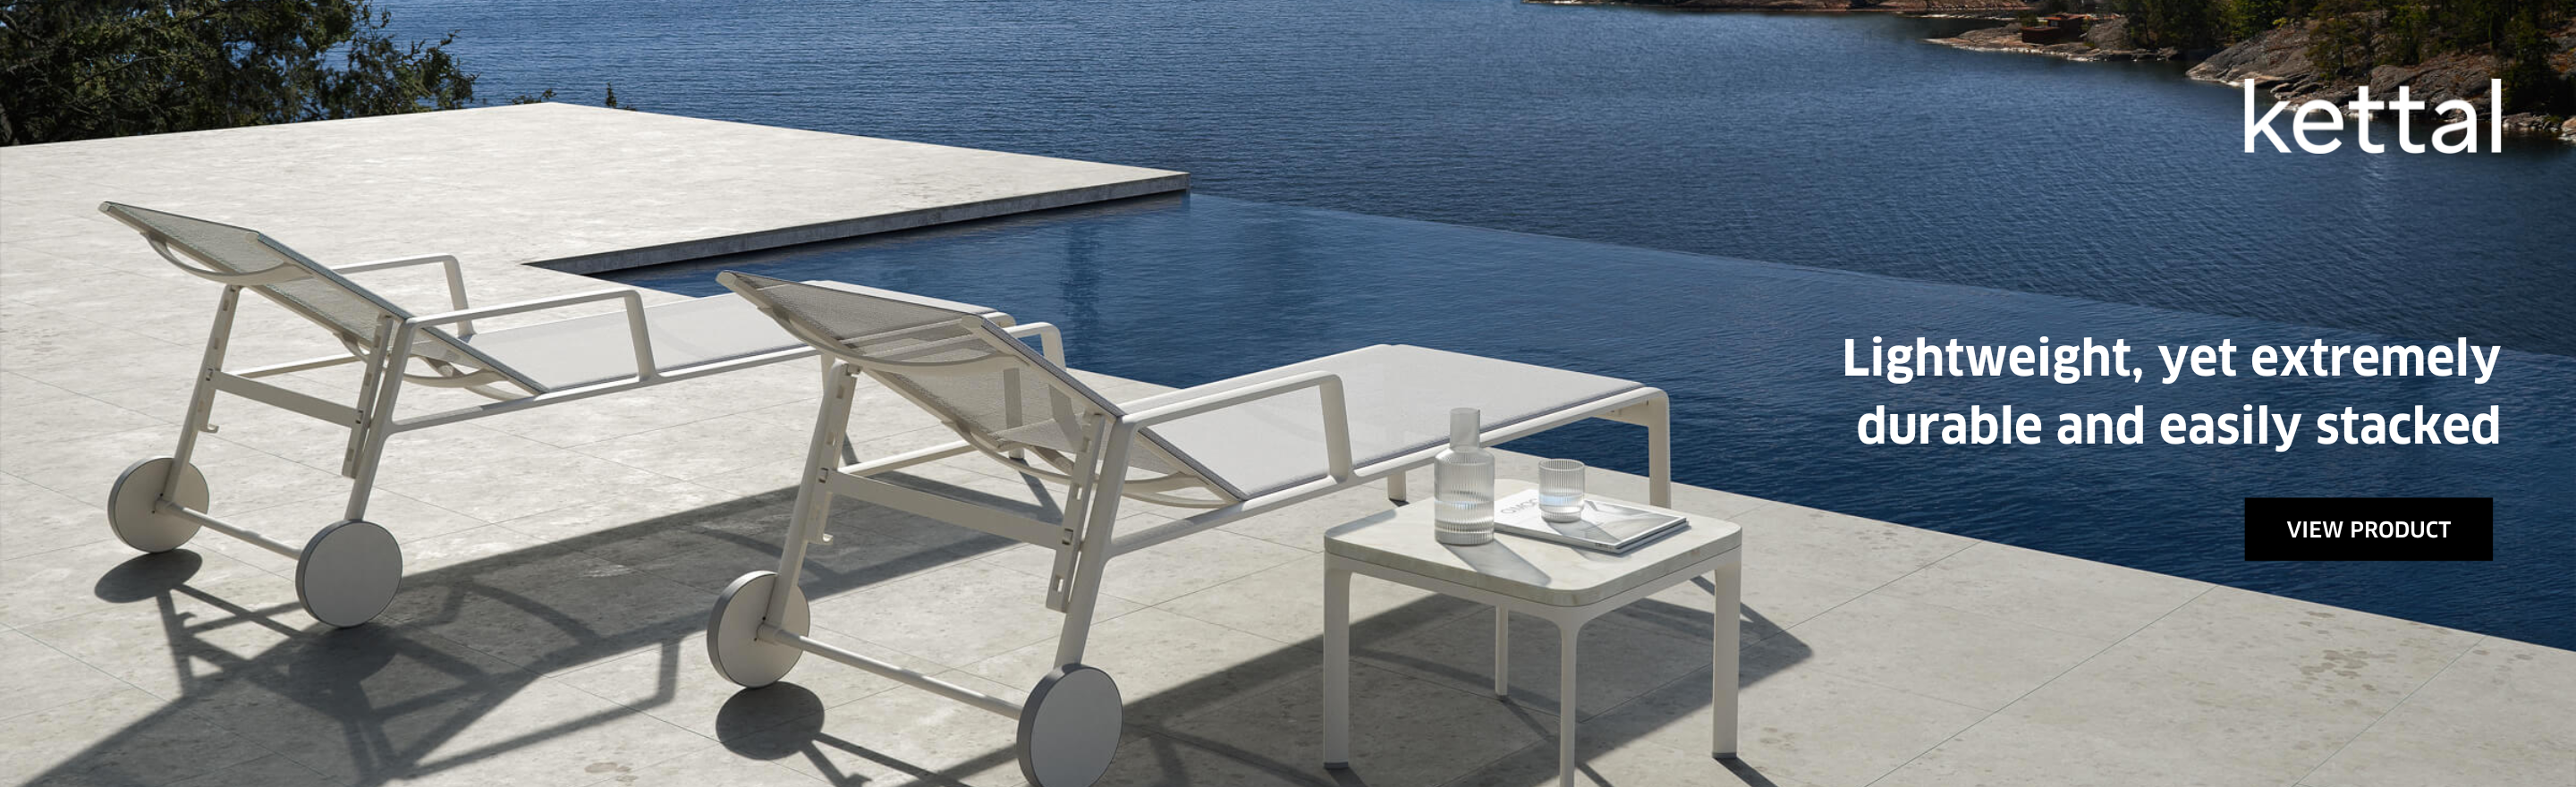 luxury furniture | kettal | outdoor furniture | xtra designs | professional contract